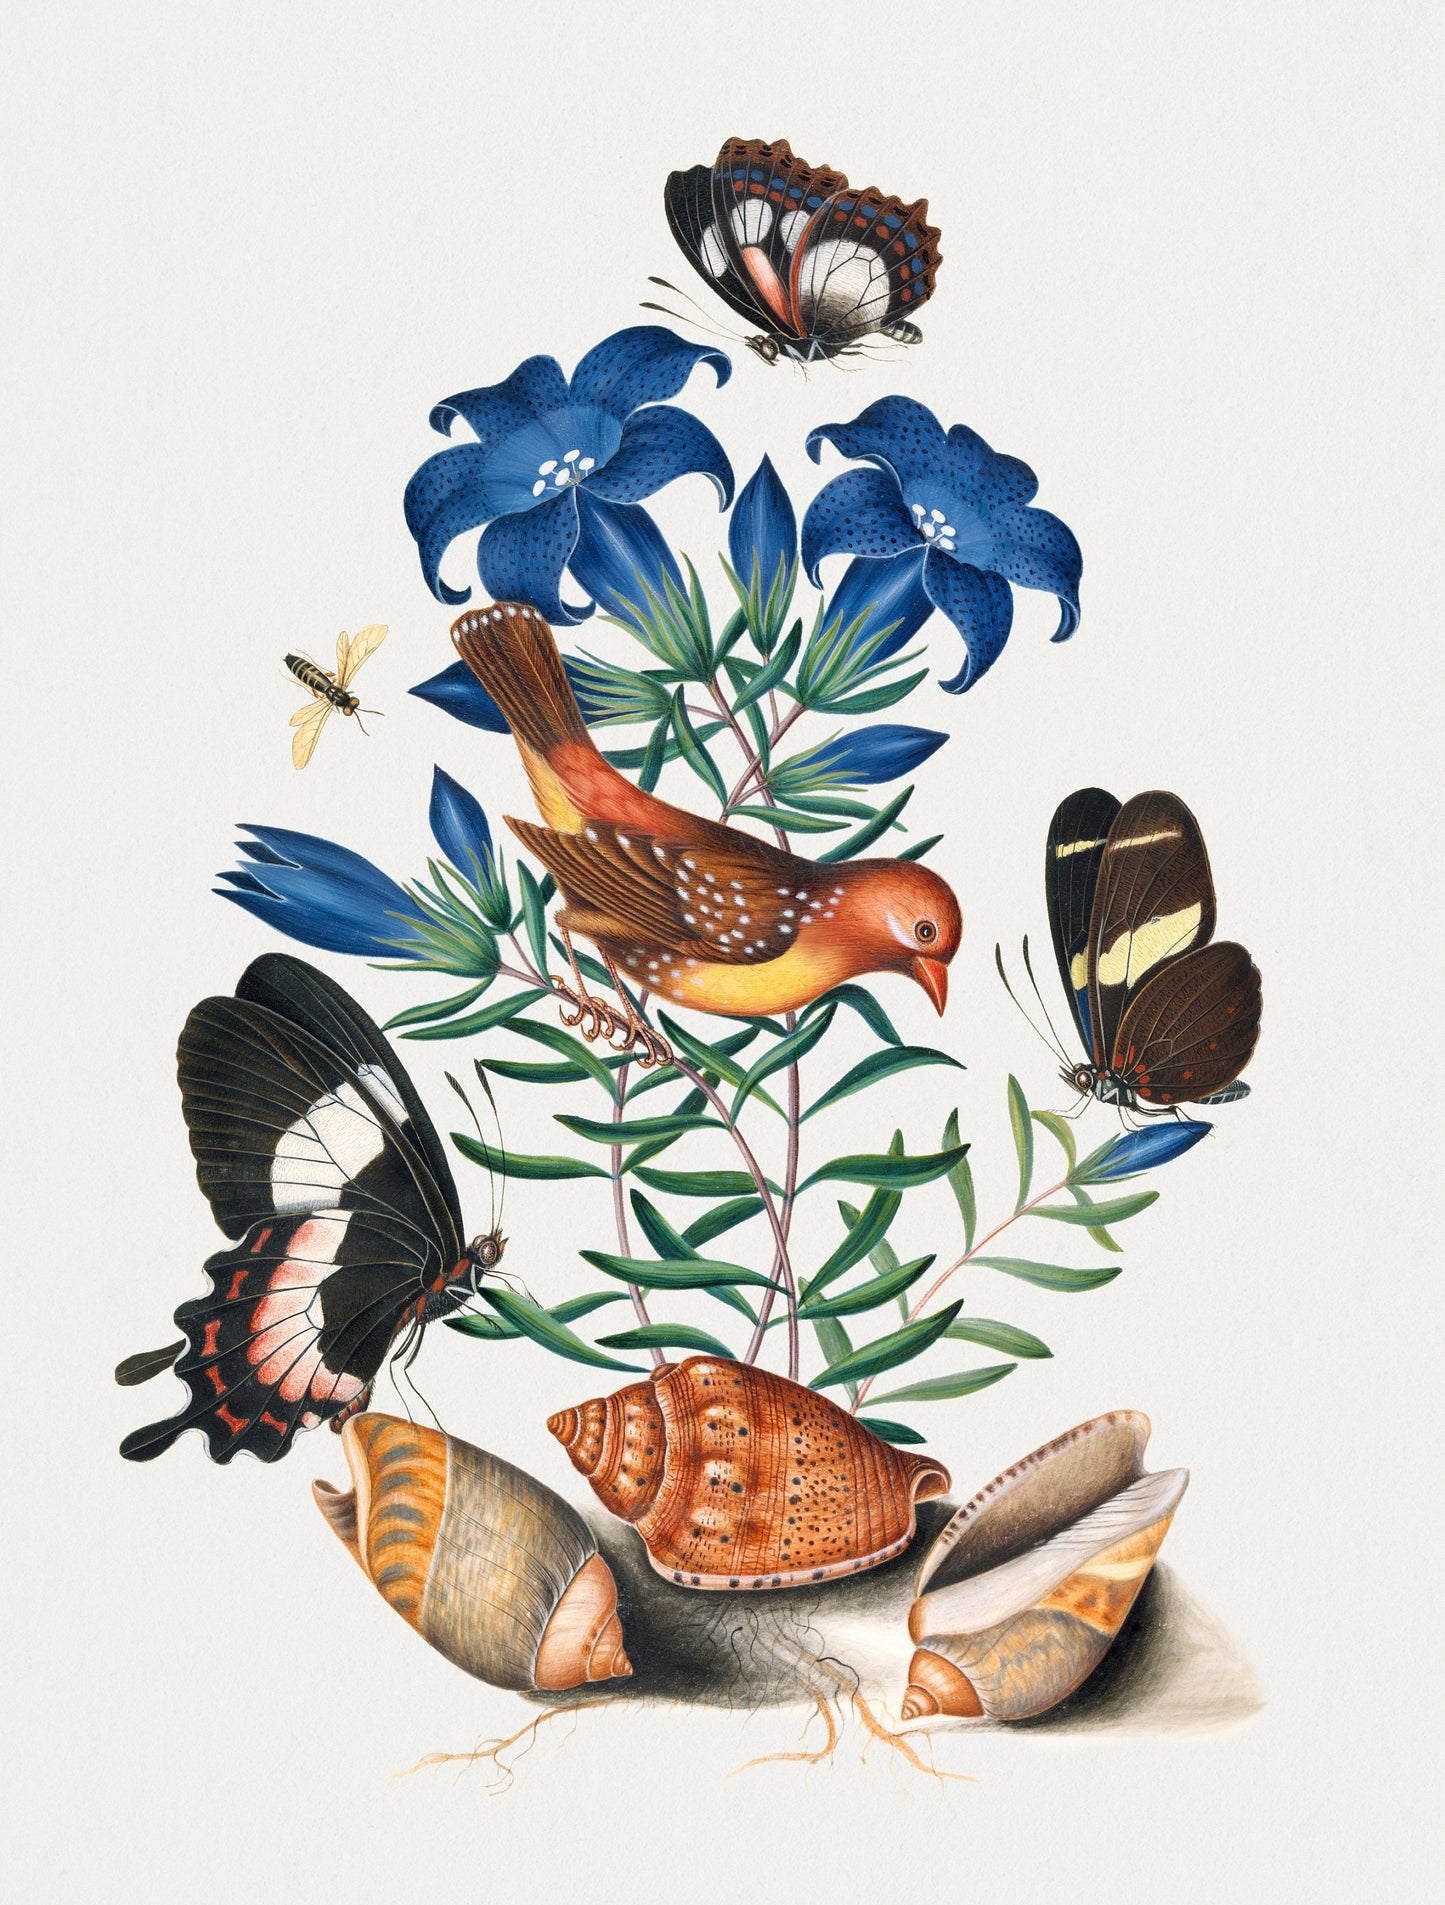 James Bolton Bird, Butterfly & Plant Illustrations [19 Images]